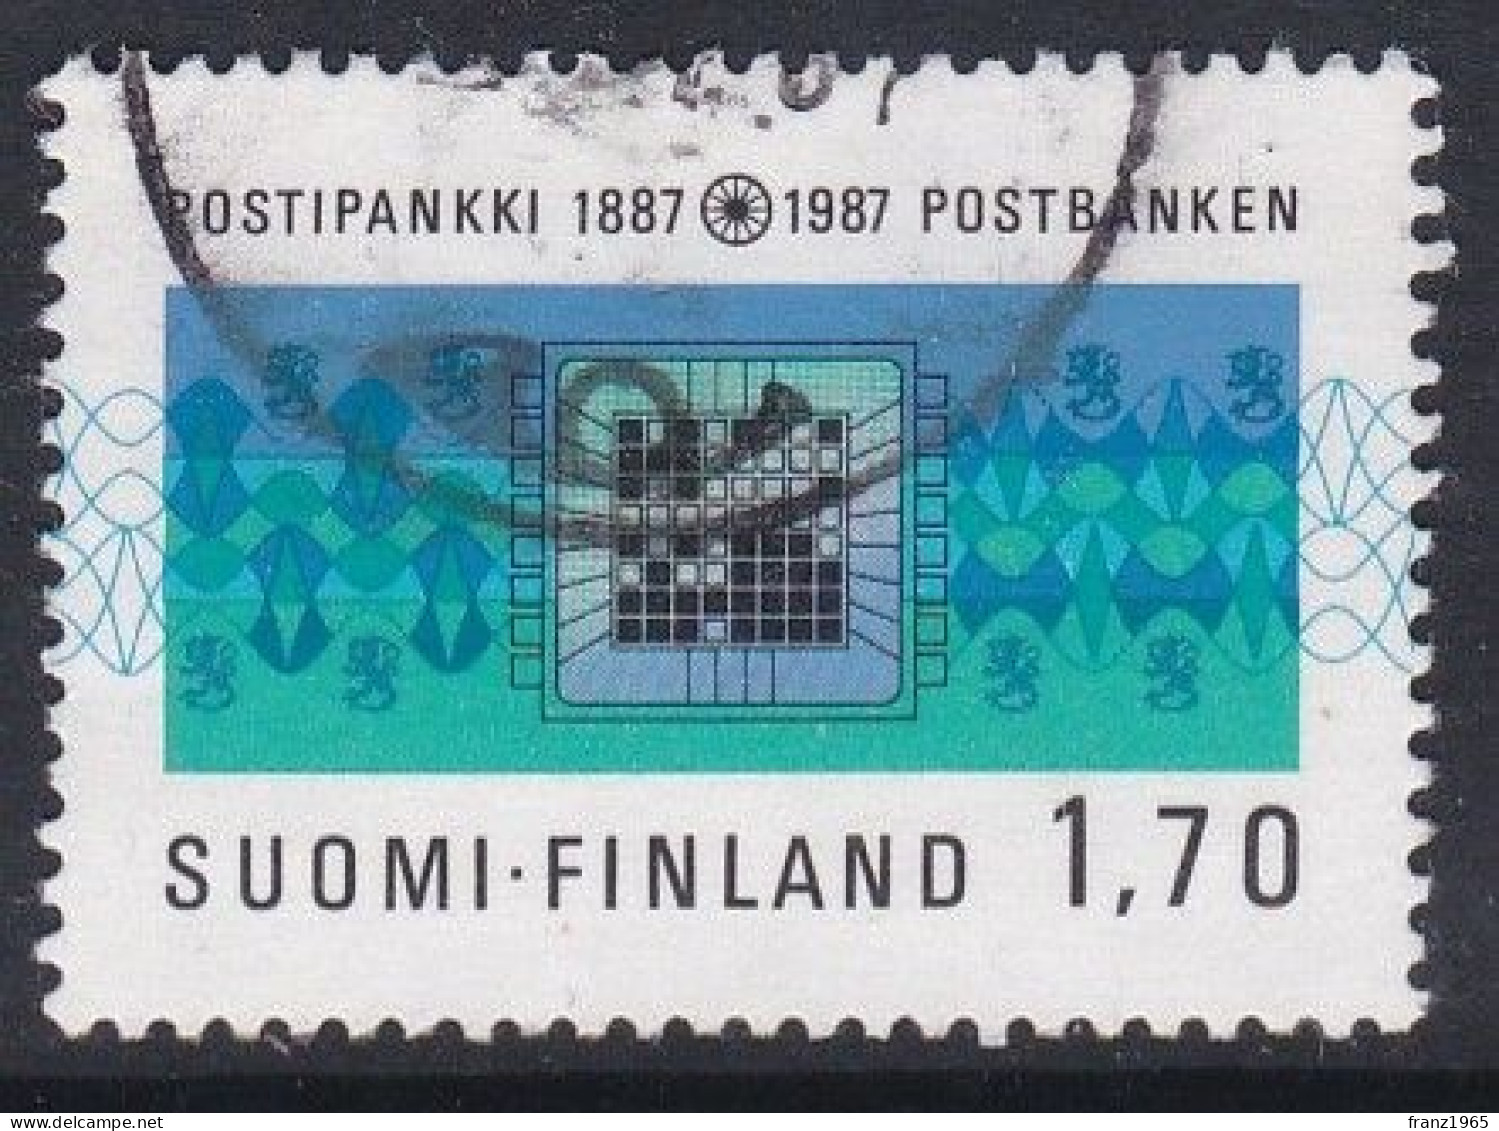 100 Years Of Finnish Postal Savings Bank - 1987 - Used Stamps